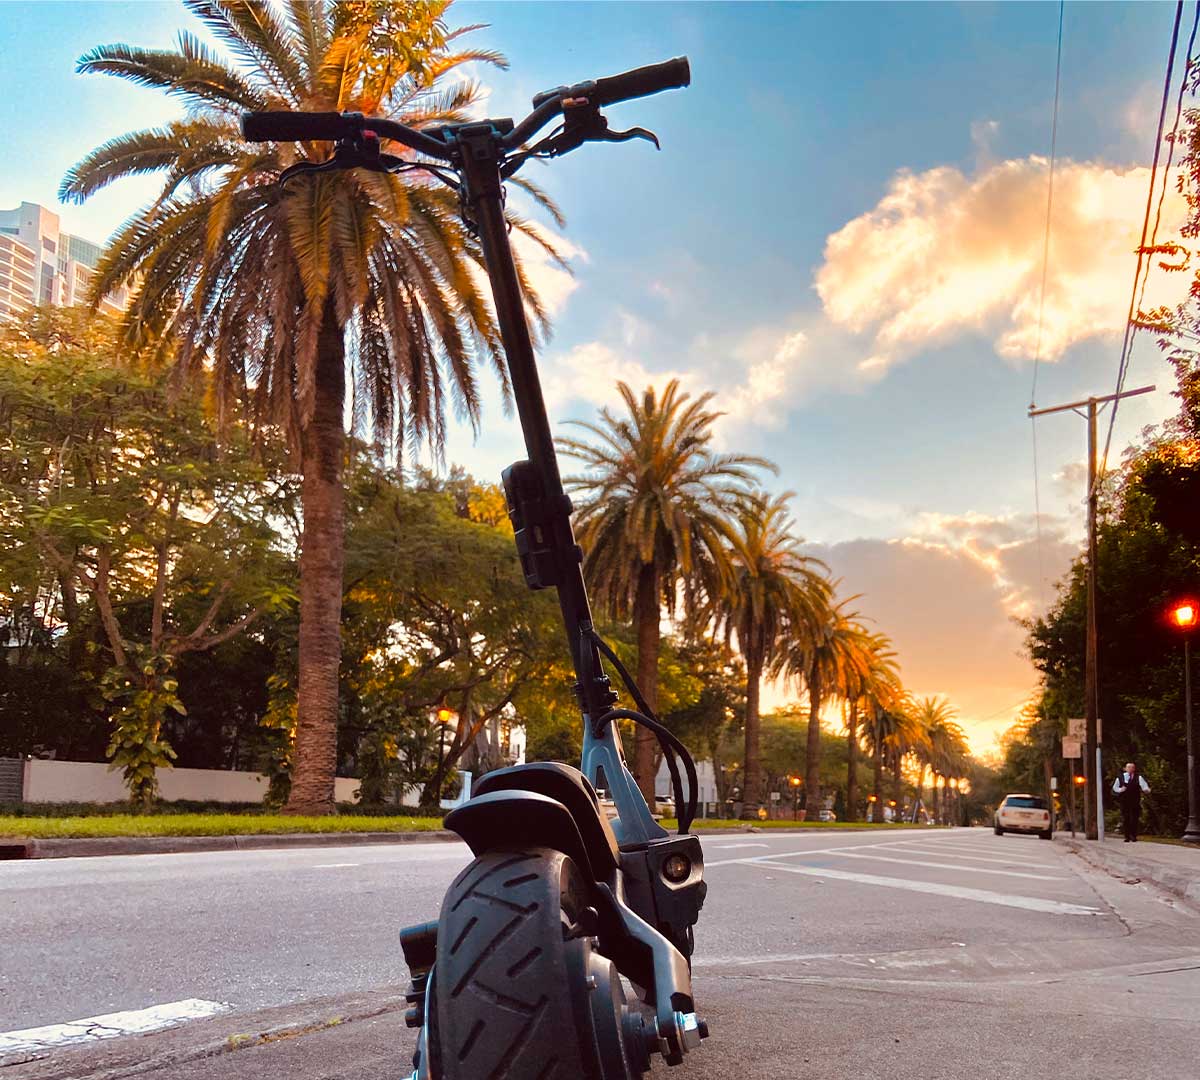 The handlebars of an electric scooter frame a city street scene at sunset, with rows of palm trees and a warm glow on the horizon, symbolizing the role of electric scooters in promoting eco-friendly transportation to combat climate change.